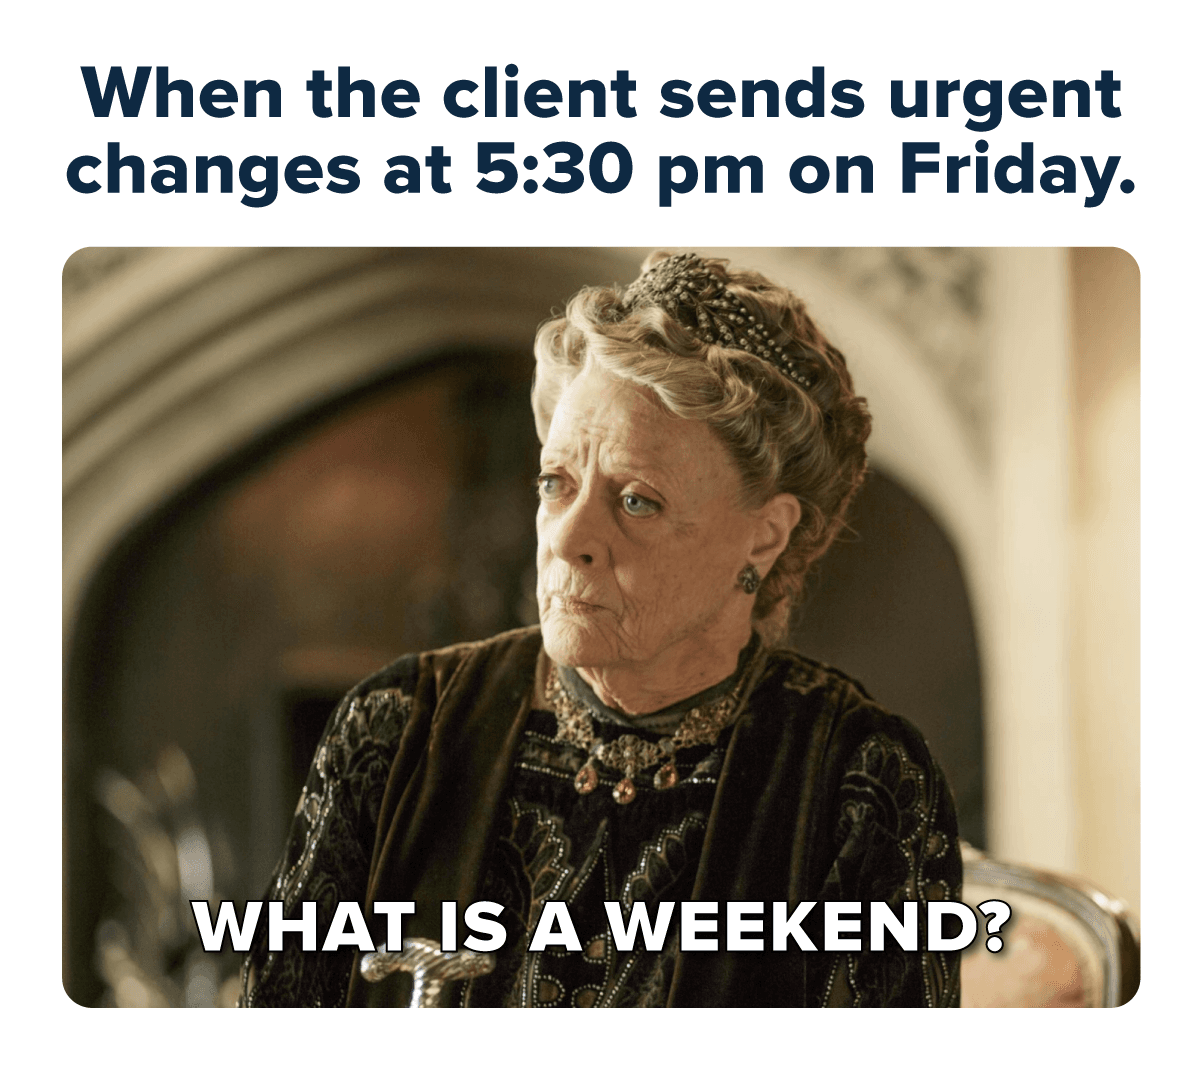 A marketing meme about urgent client requests based on the Downton Abbey What is a weekend? scene